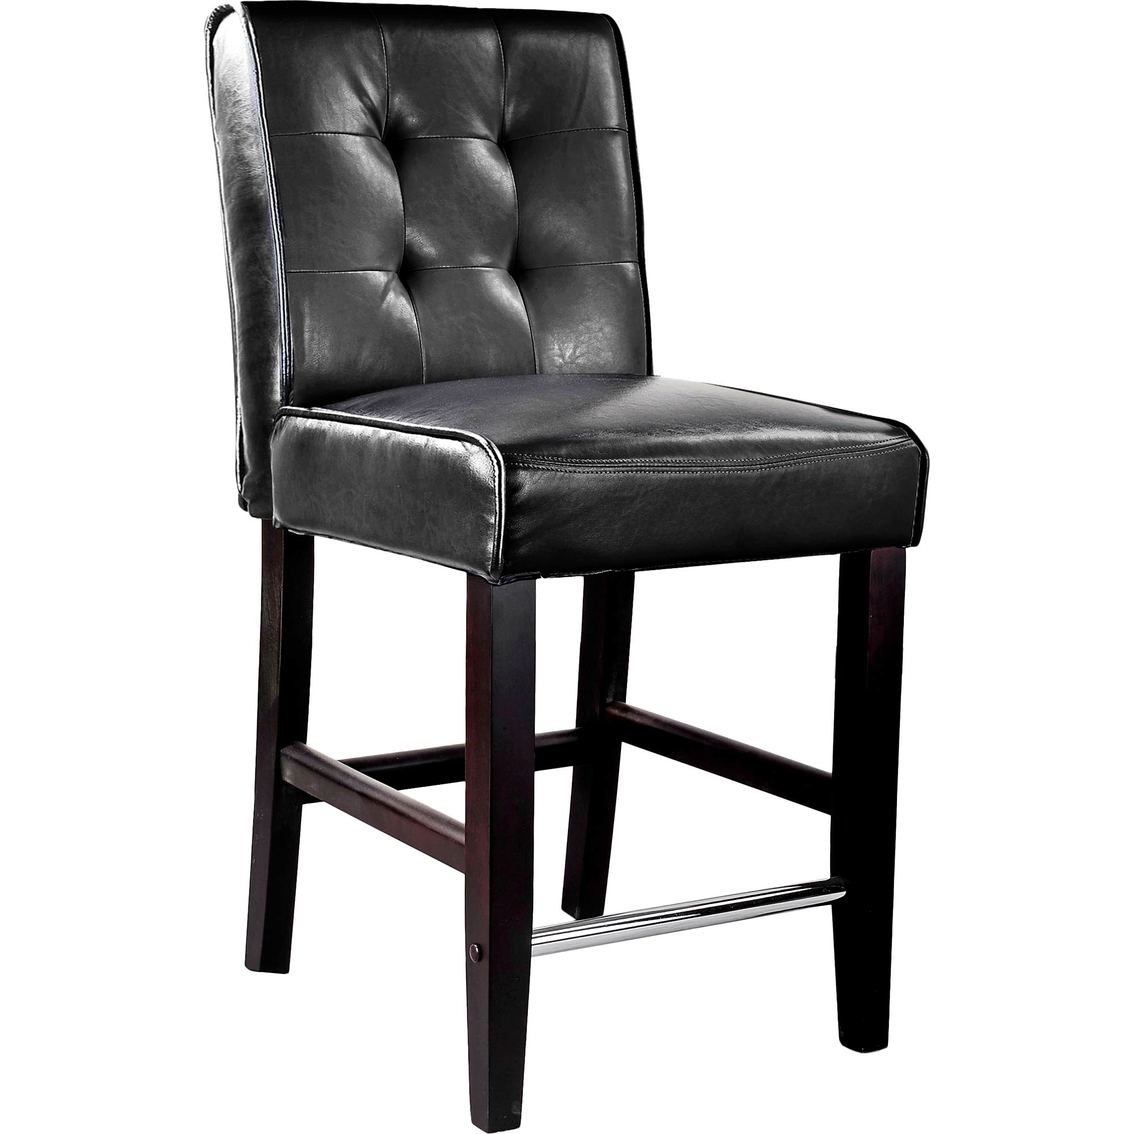 CorLiving Antonio Counter Height Stool in Tufted Bonded Leather - Image 2 of 3